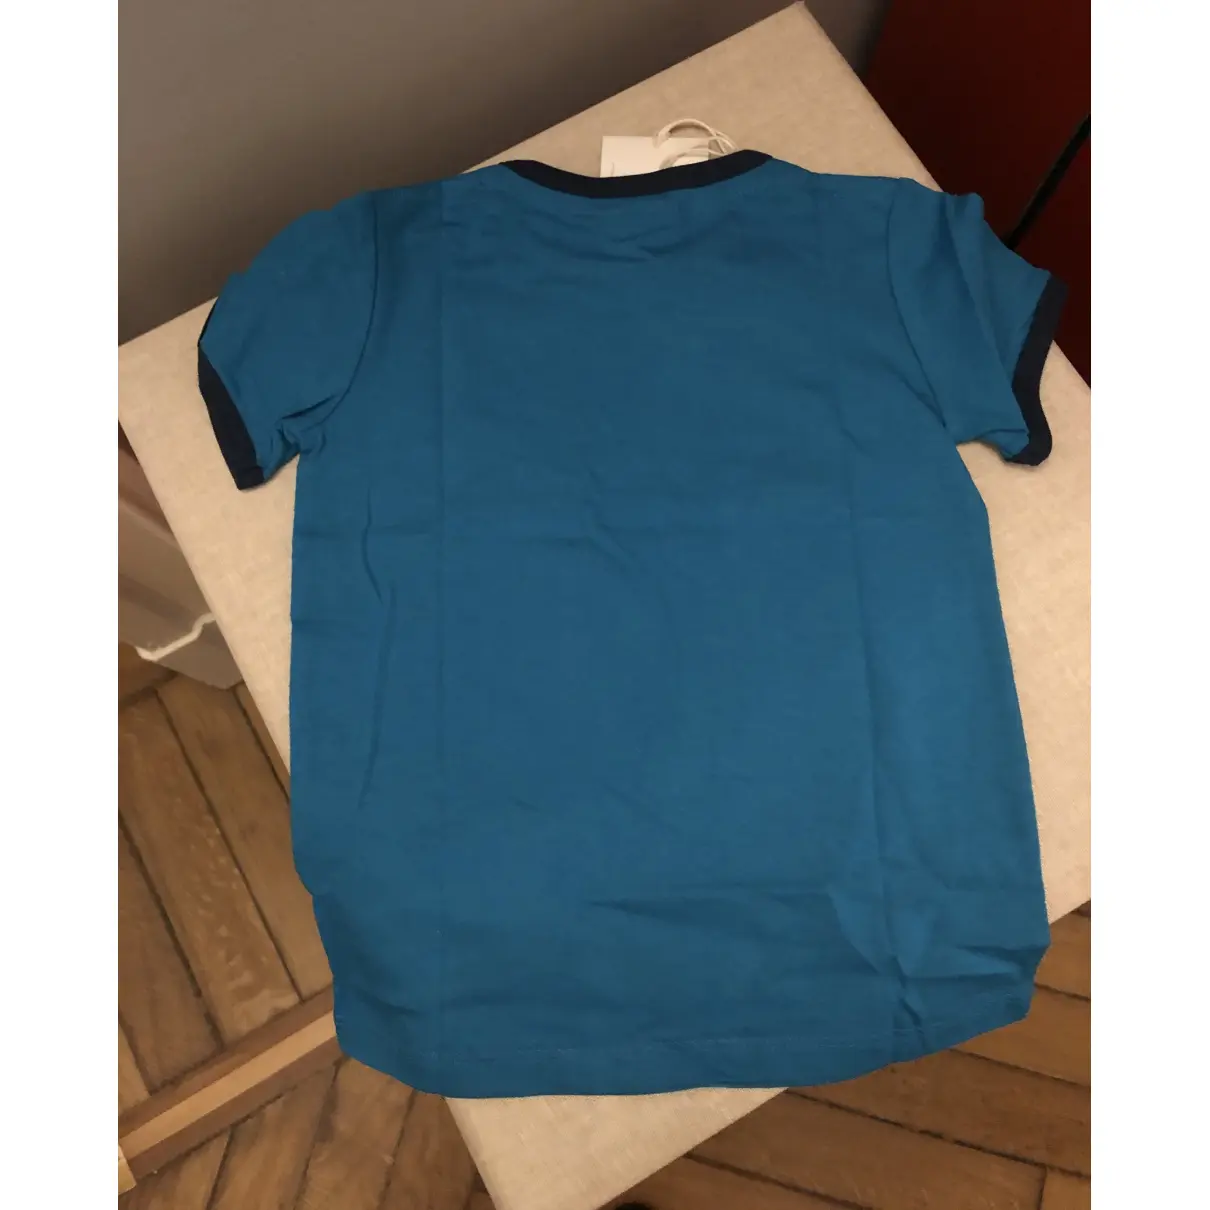 Buy Gucci Green Cotton Top online